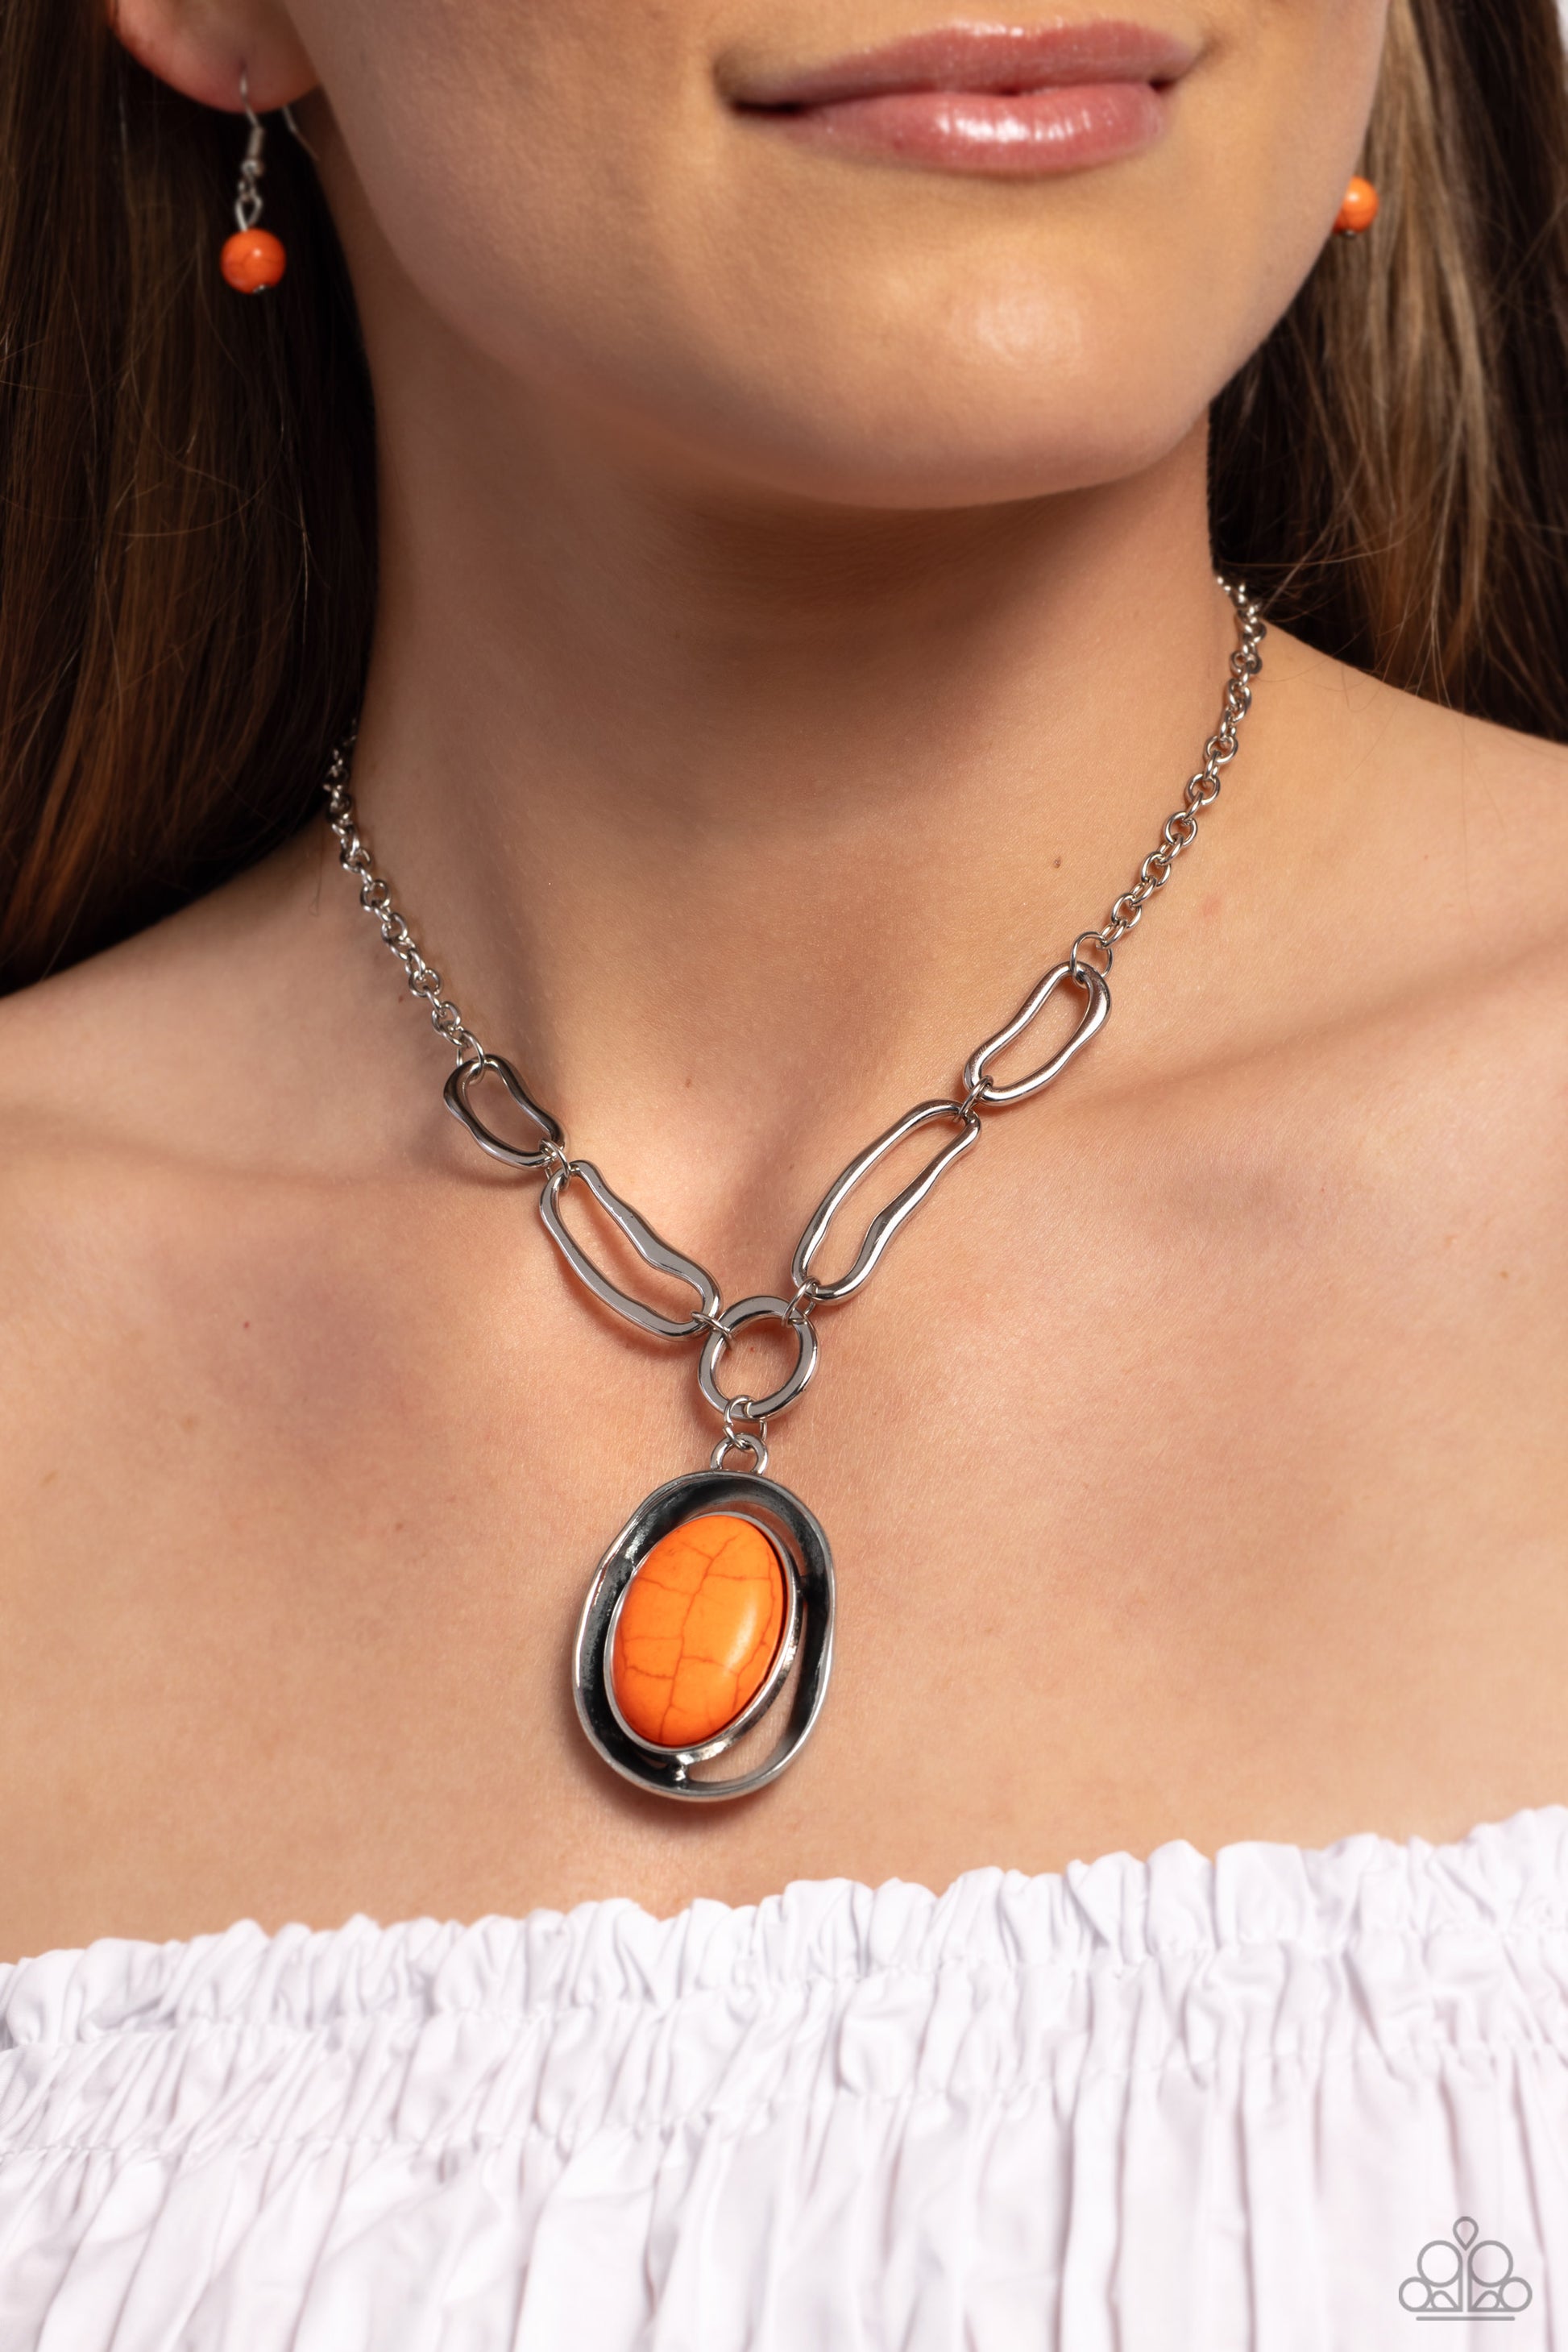 Paparazzi Accessories - Sandstone Stroll - Orange Necklaces a silver links give way to an exaggerated orange stone encased in a rippling silver frame with irregular borders, to create a bold focal point. Features an adjustable clasp closure. As the stone elements in this piece are natural, some color variation is normal.  Featured inside The Preview at Made for More! Sold as one individual necklace. Includes one pair of matching earrings.